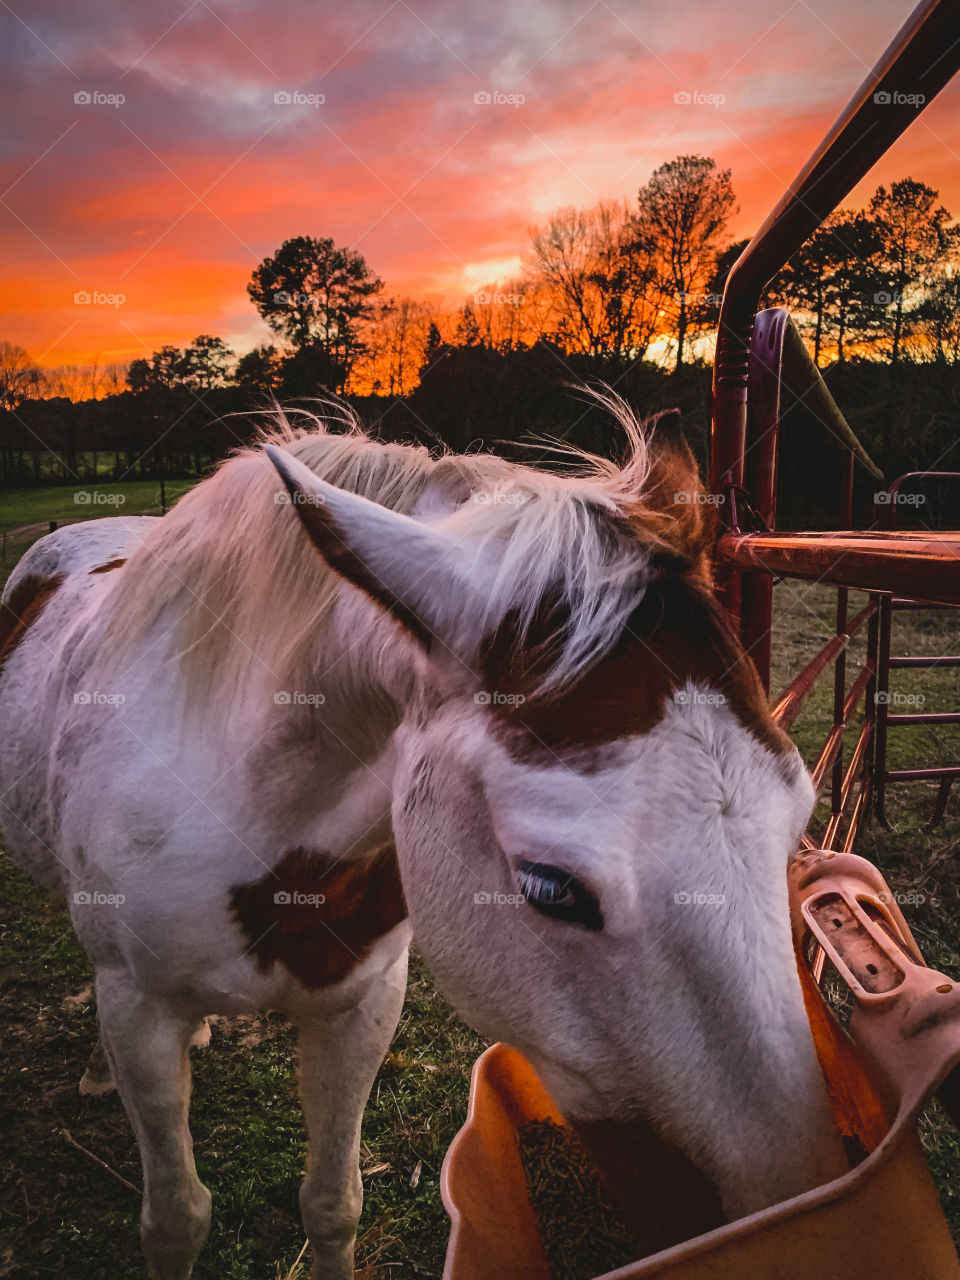 Colorful skies while feeding the horses in rural Texas